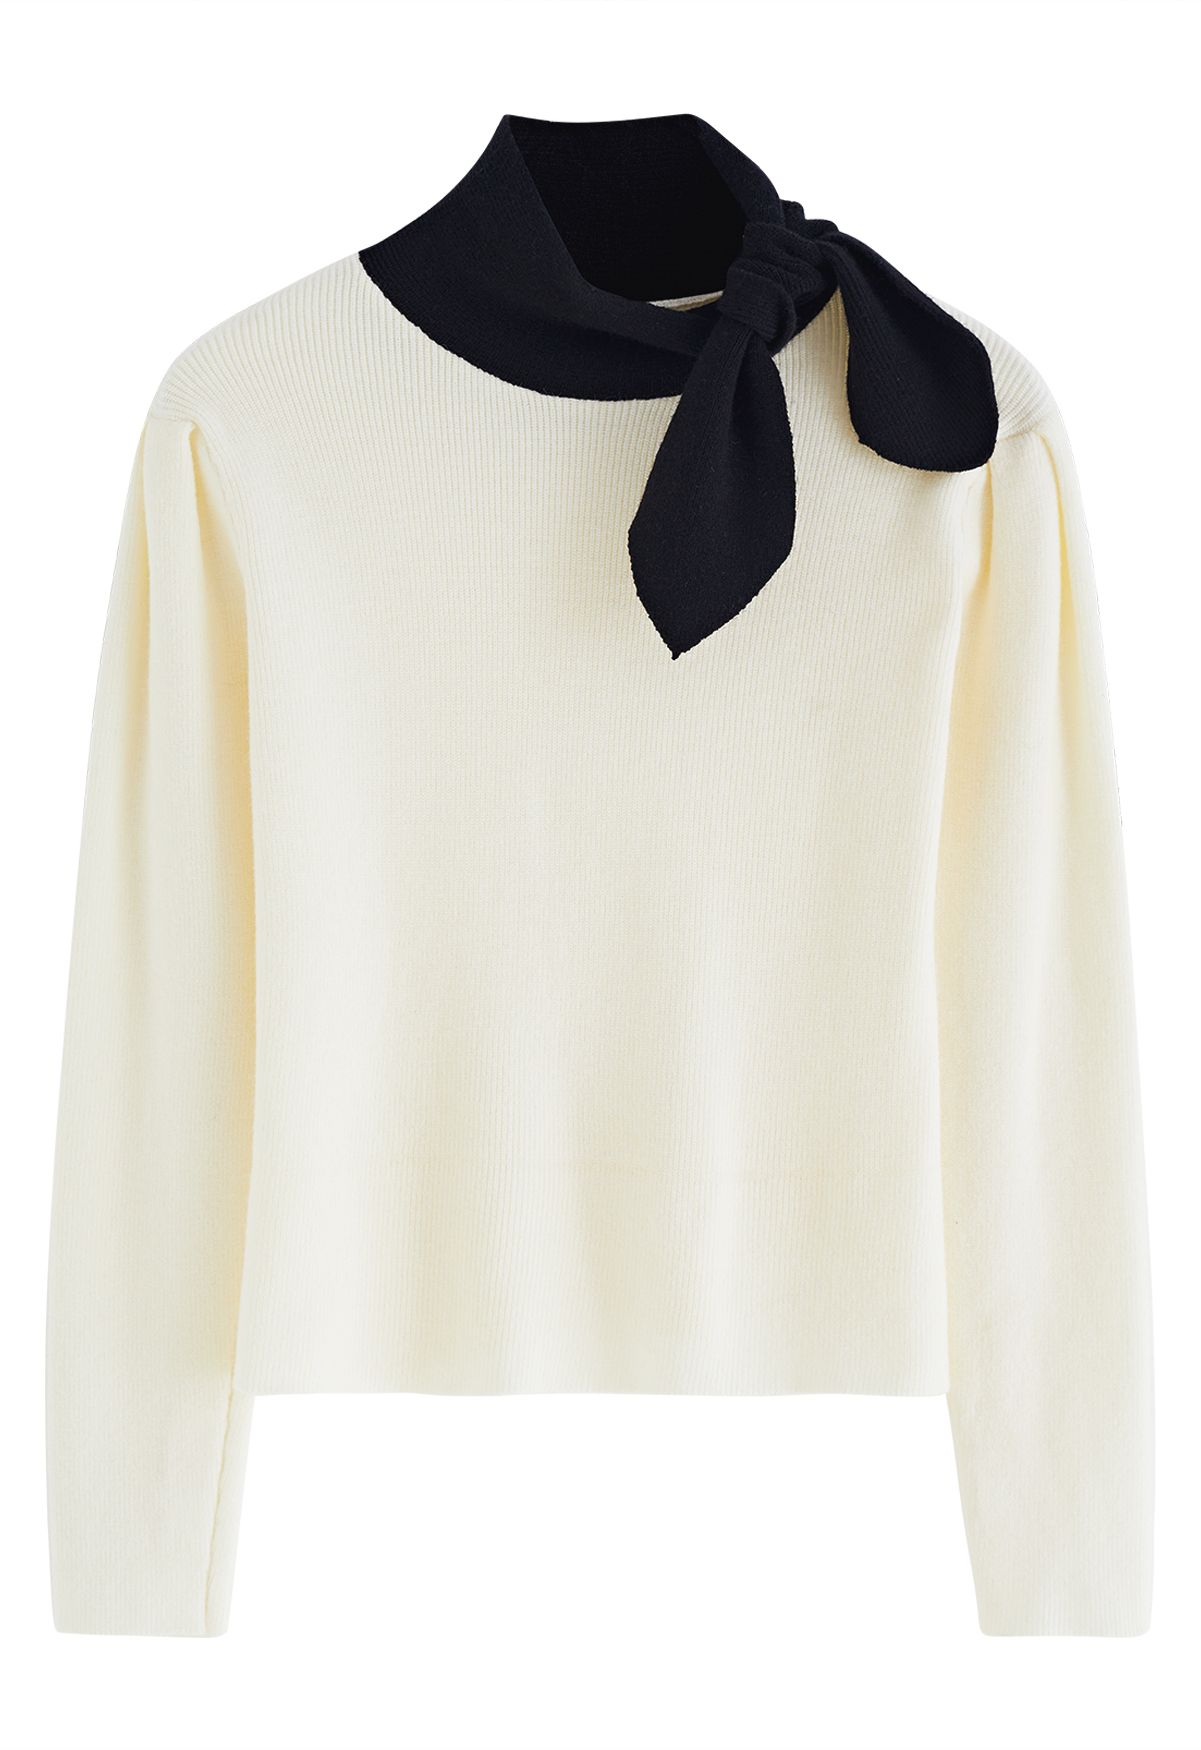 Contrast Tie-Knot Neck Knit Top in Cream